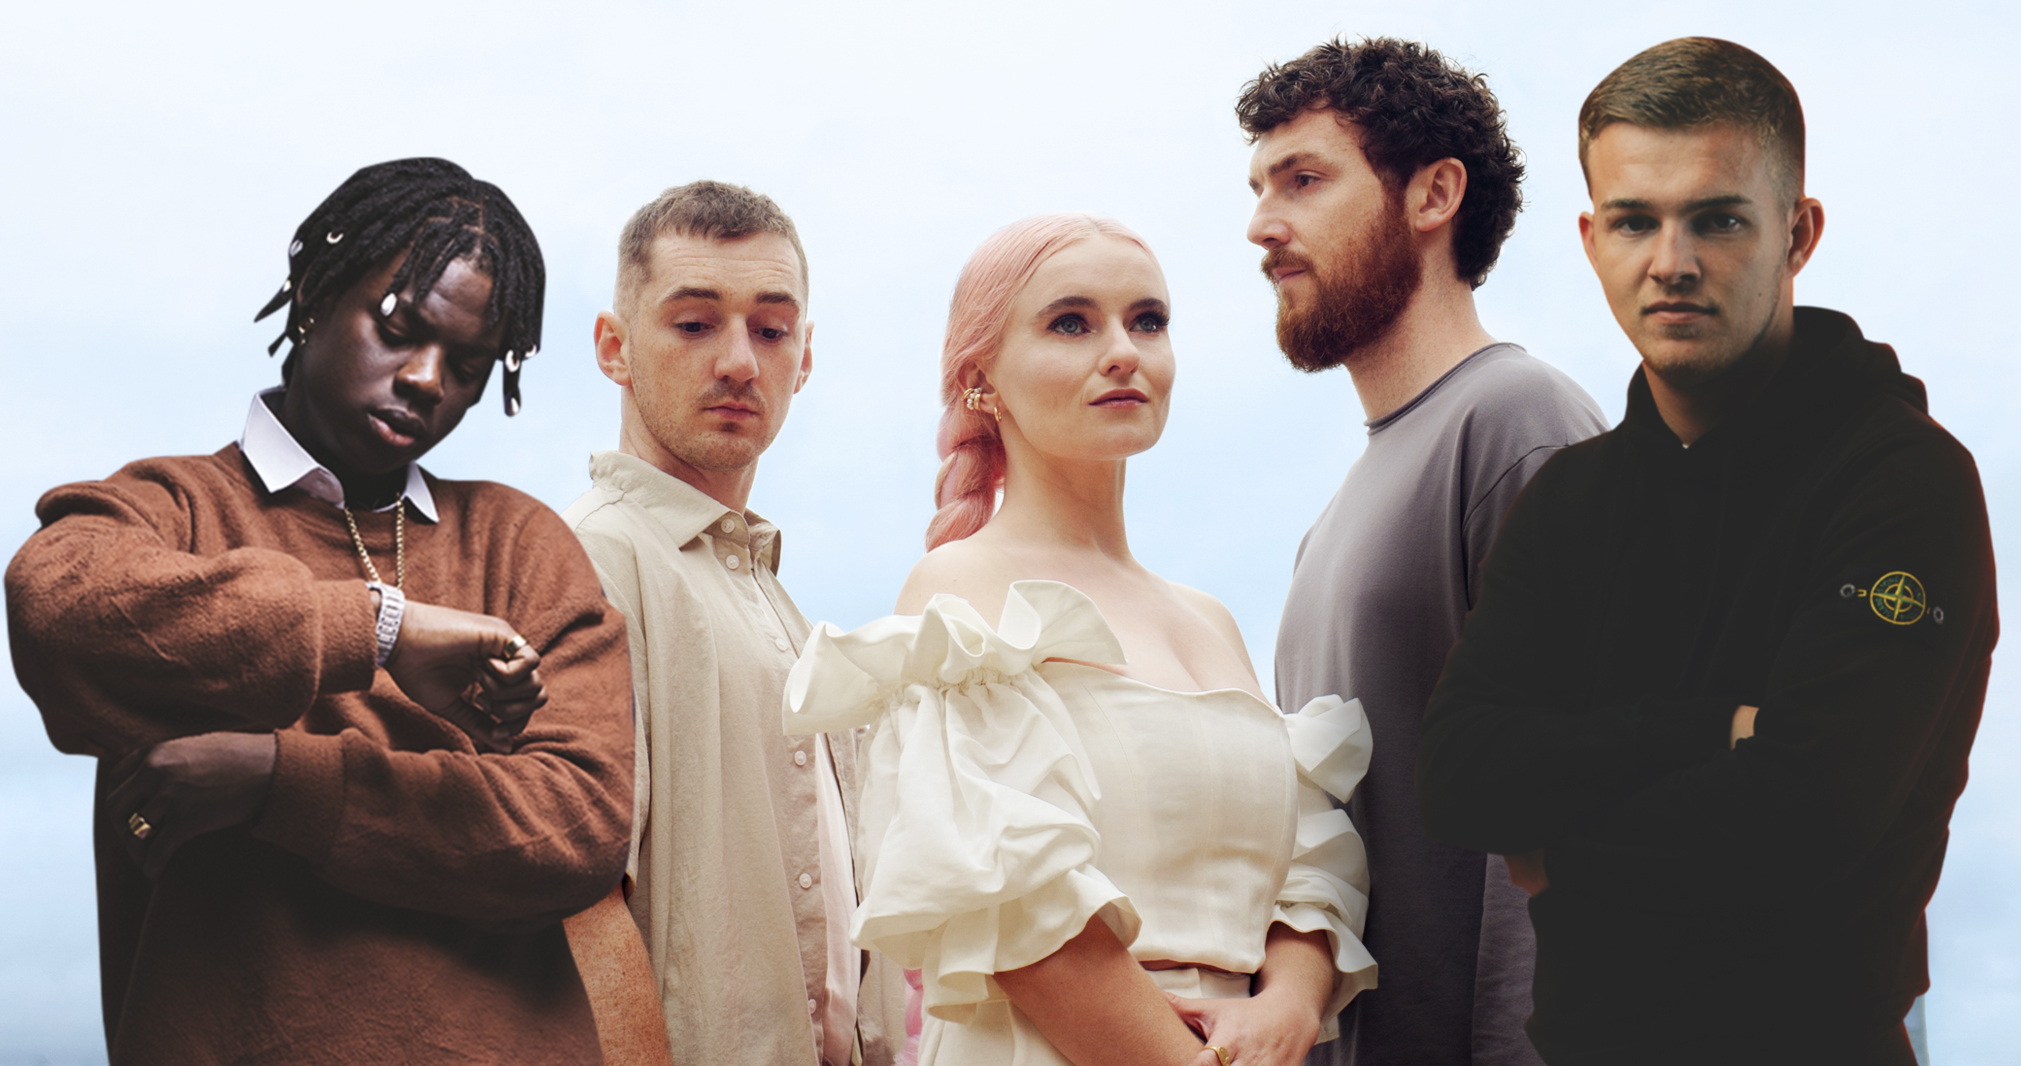 First Listen: Clean Bandit, French The Kid and Rema team up on sublime late summer smash Sad Girls